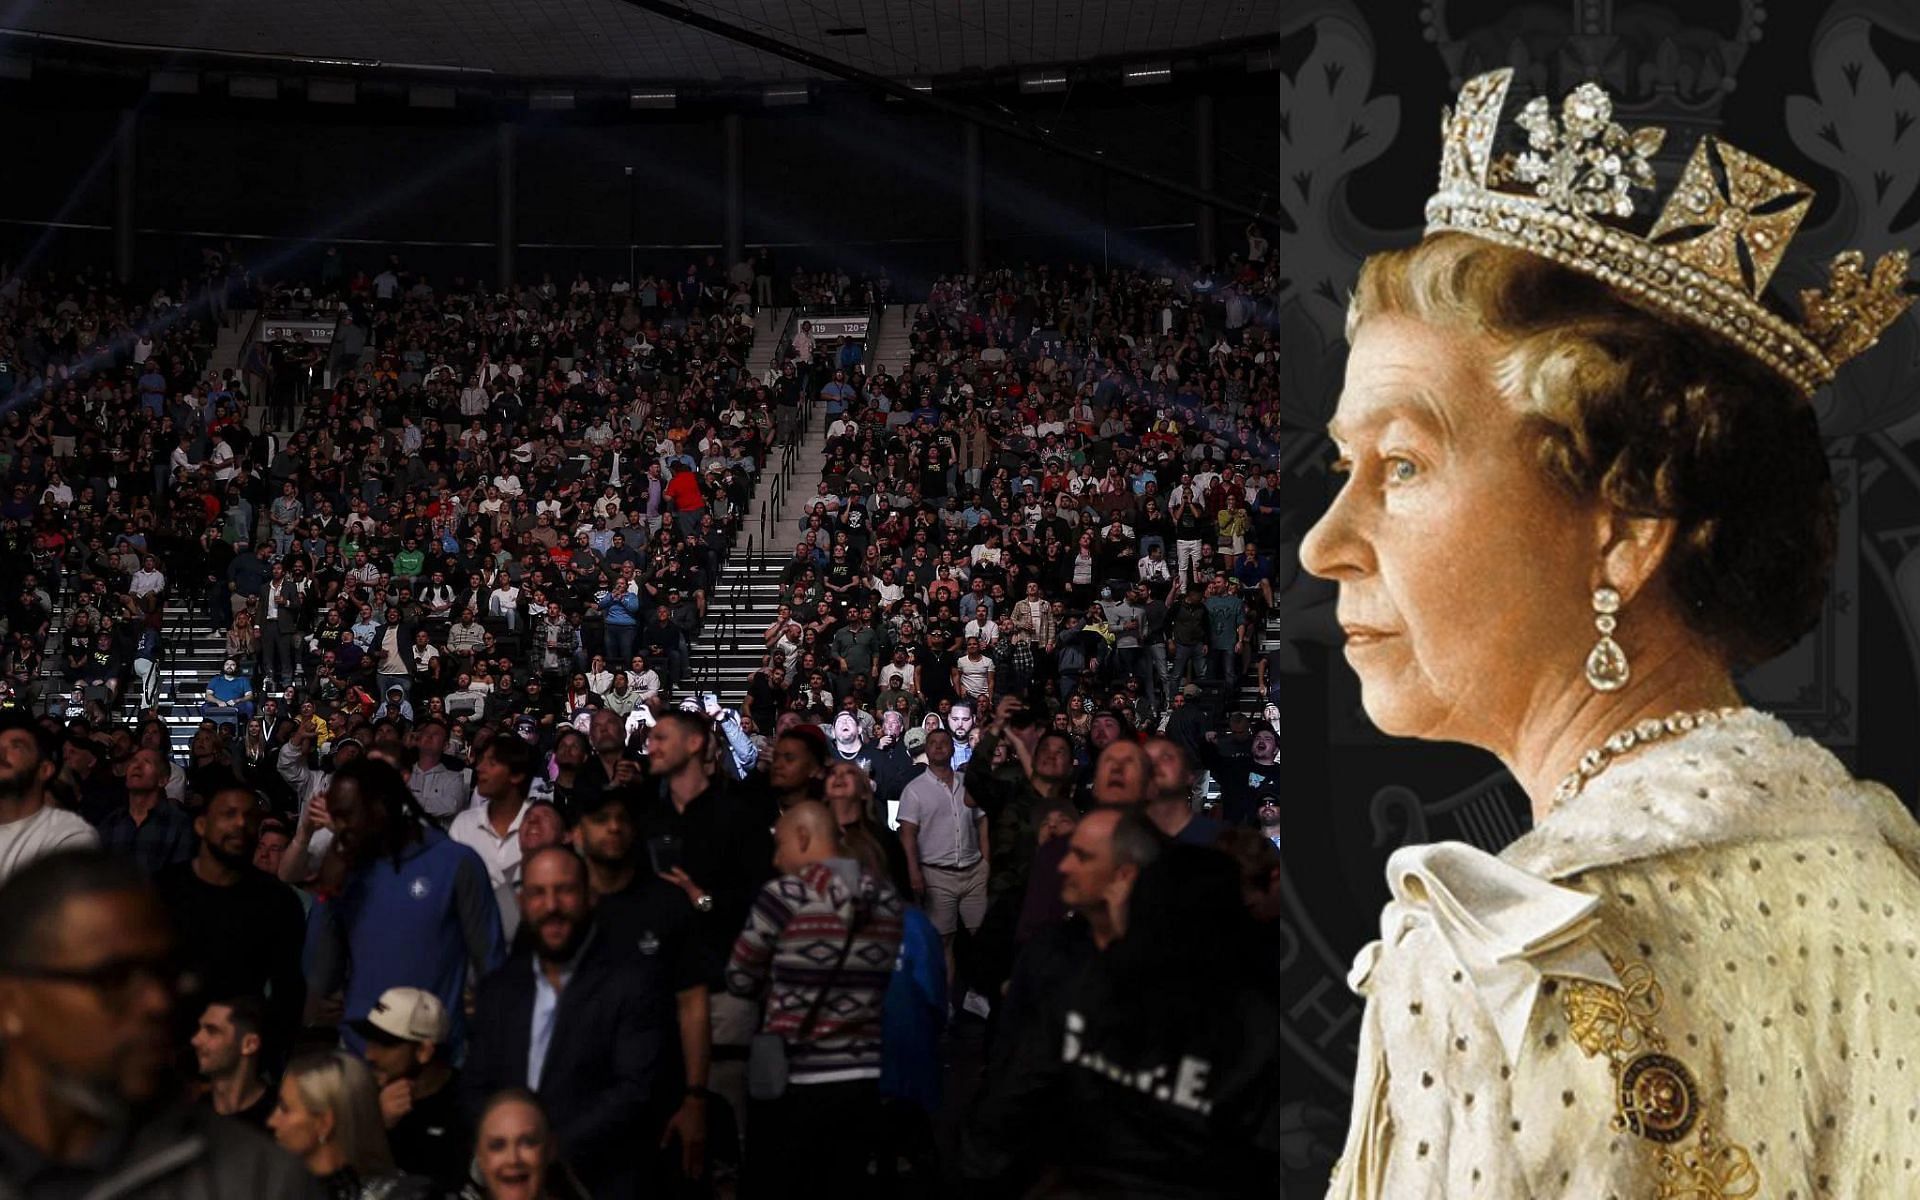 UFC fans boo a tribute to Queen Elizabeth II [Photo credit: @BBCBreaking on Twitter]